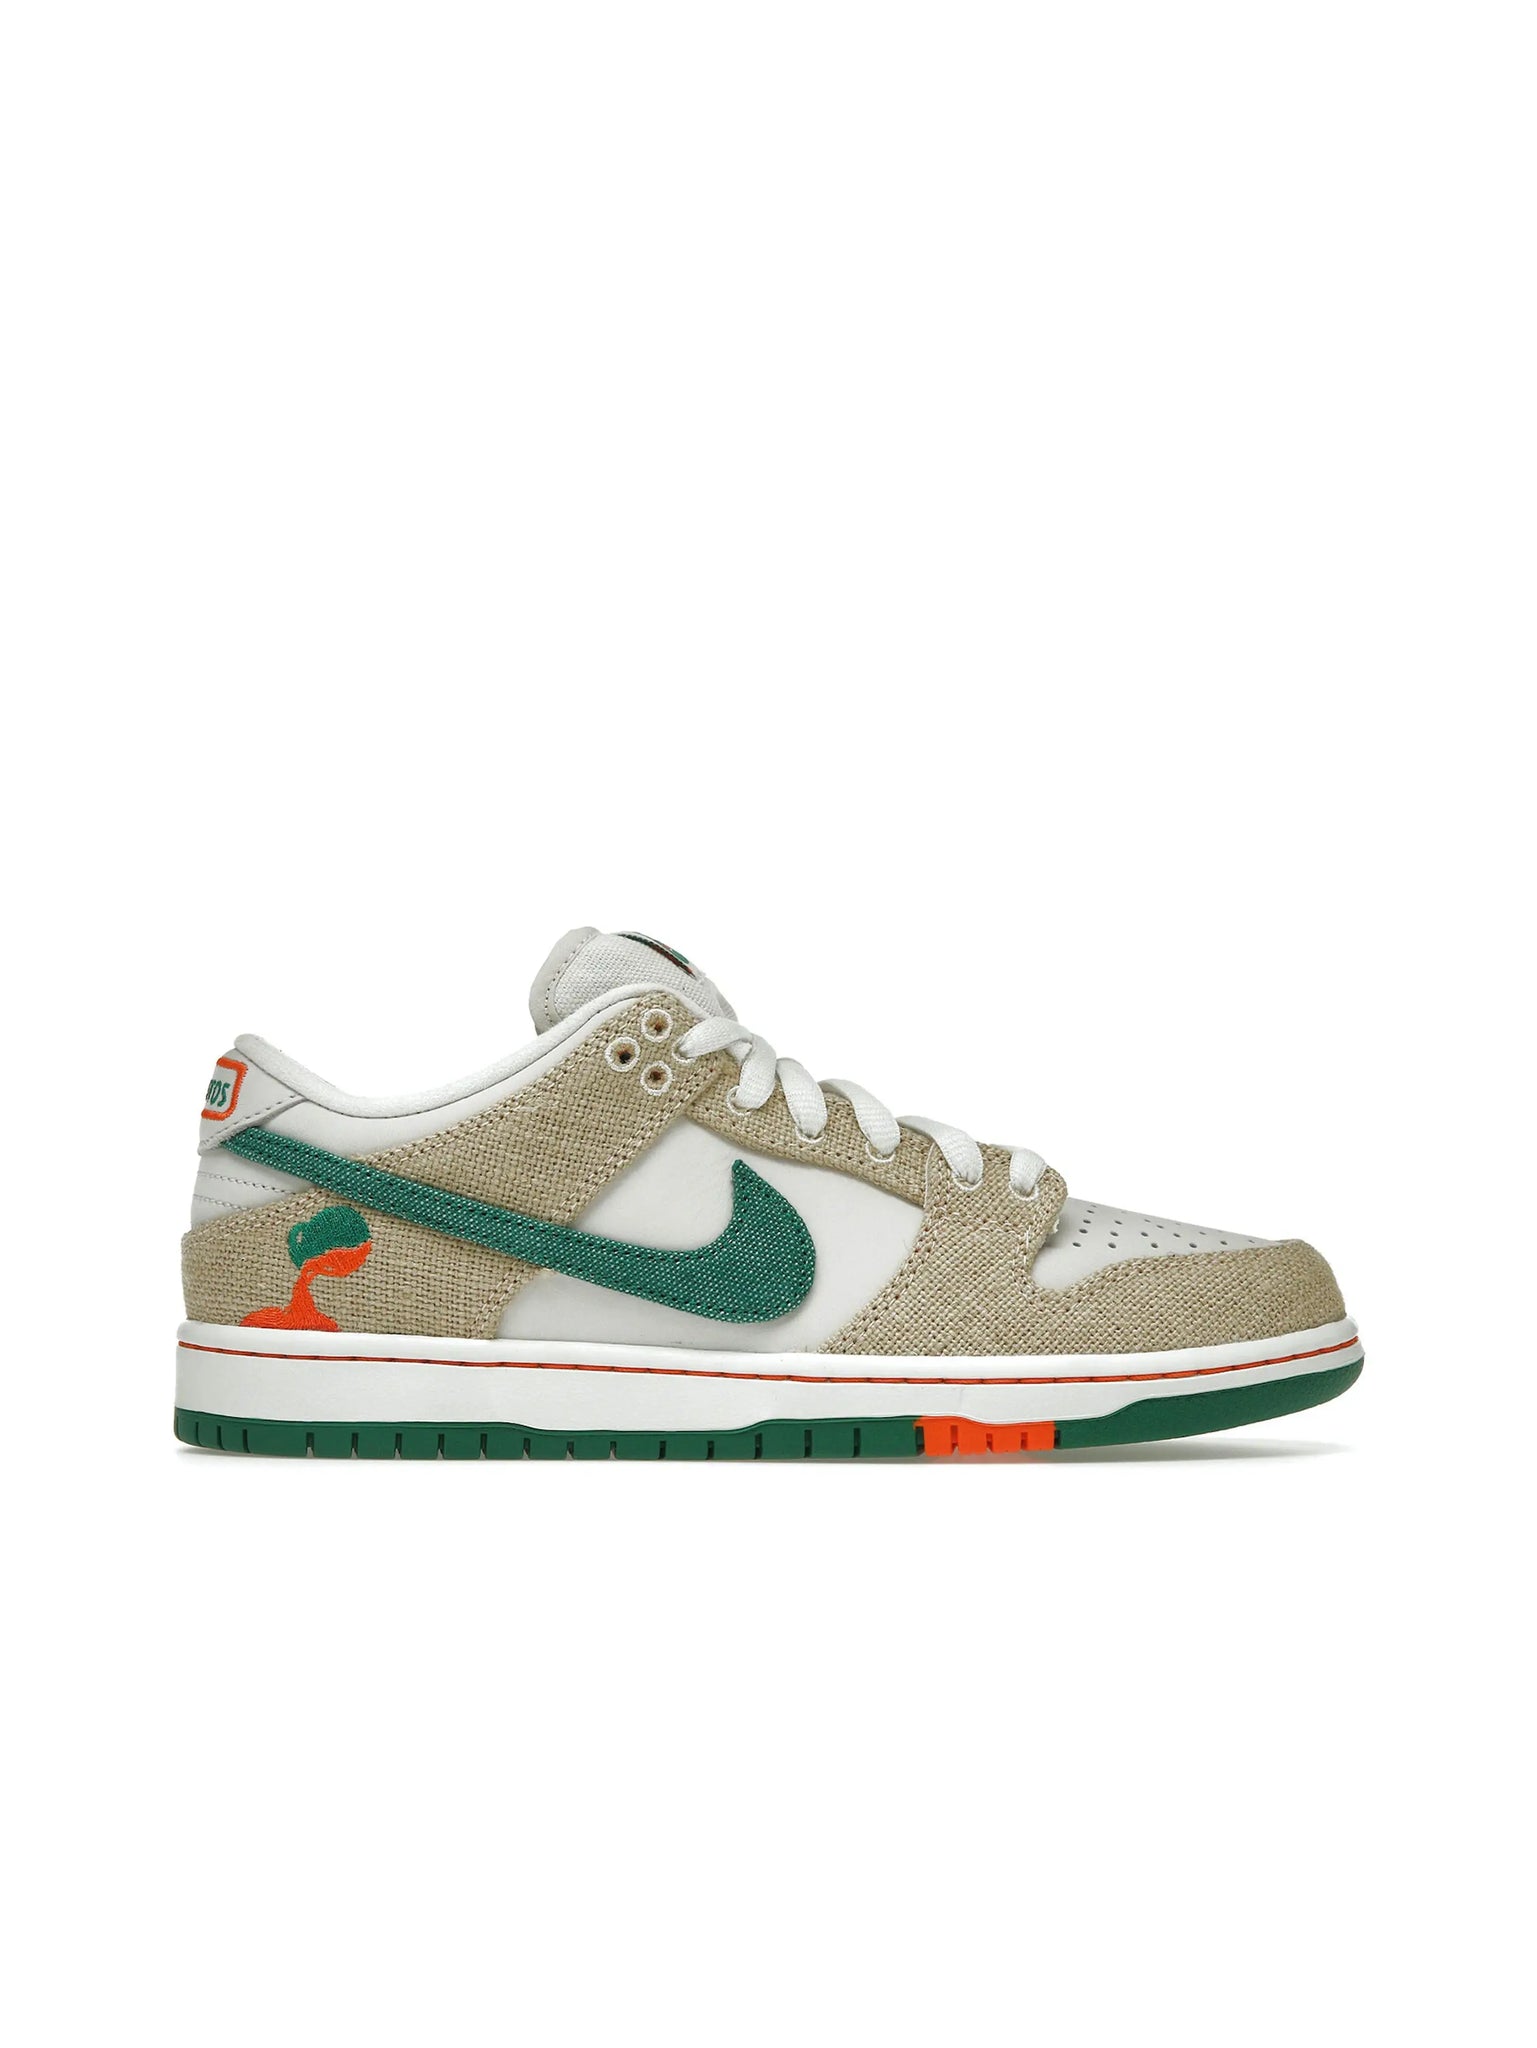 Nike SB Dunk Low Jarritos in Auckland, New Zealand - Shop name